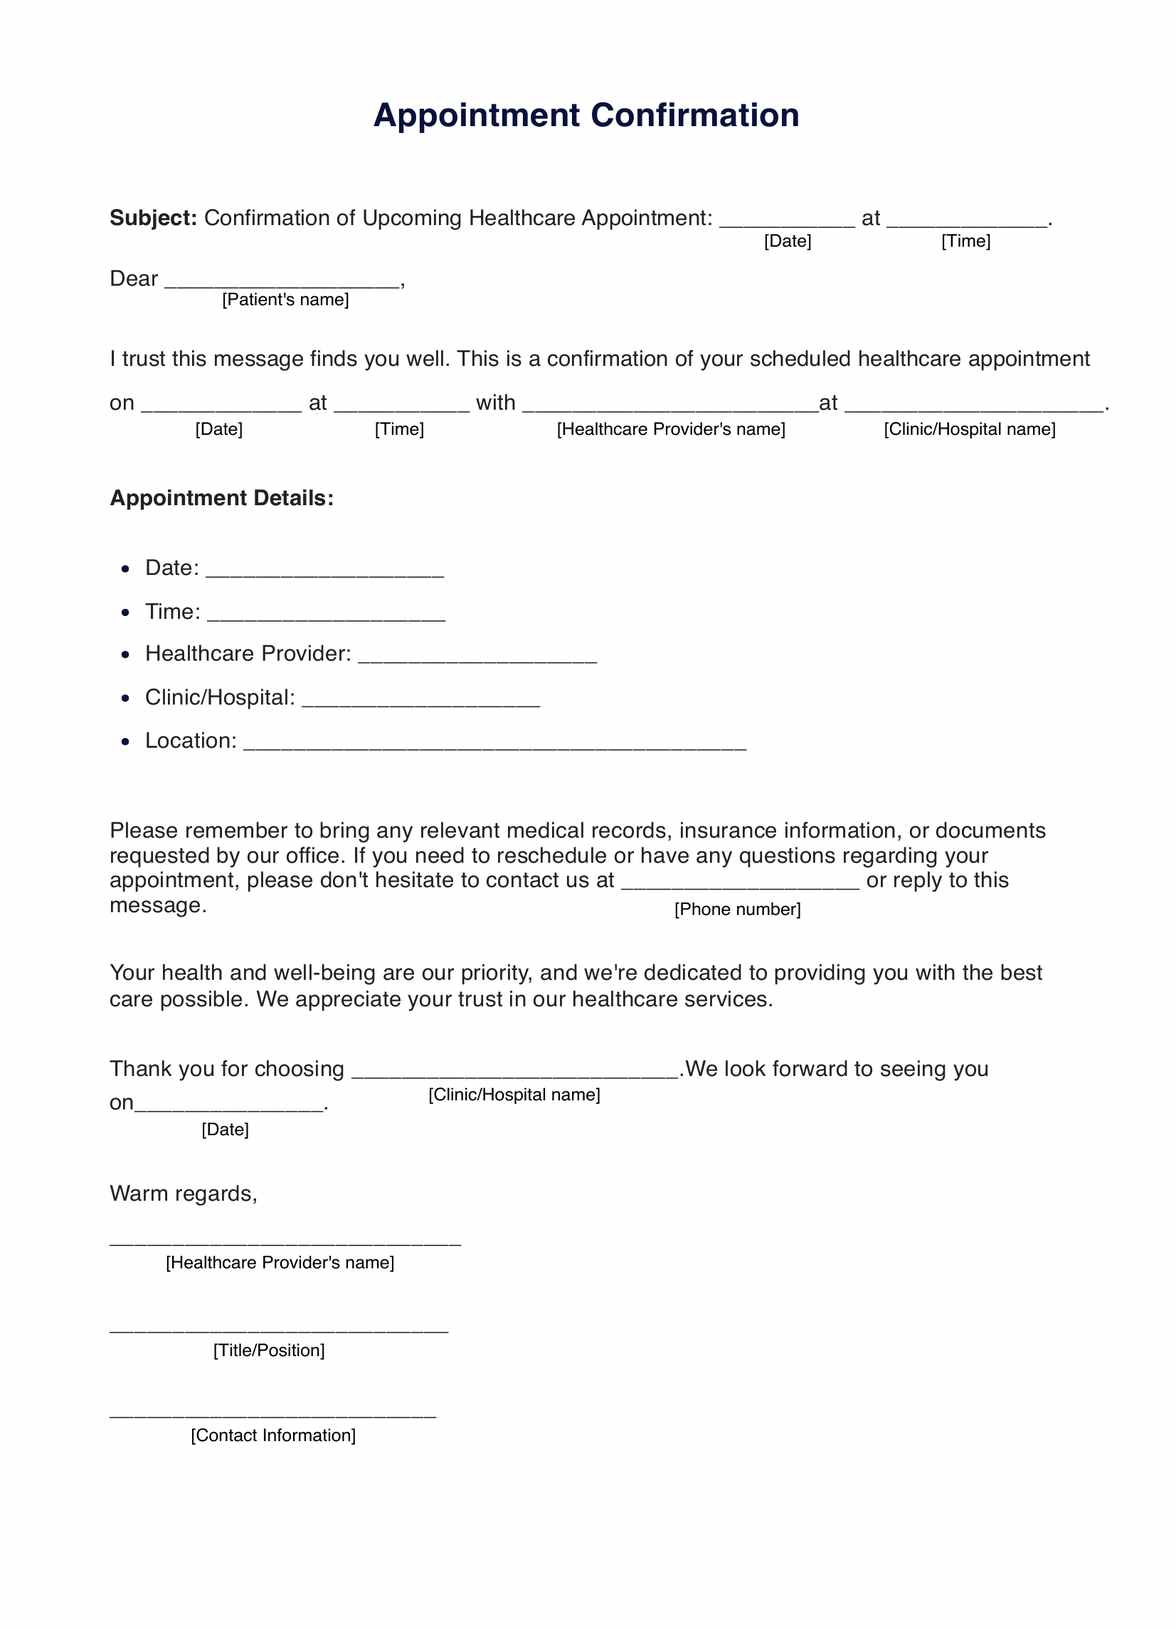 Appointment Confirmation Template PDF Example